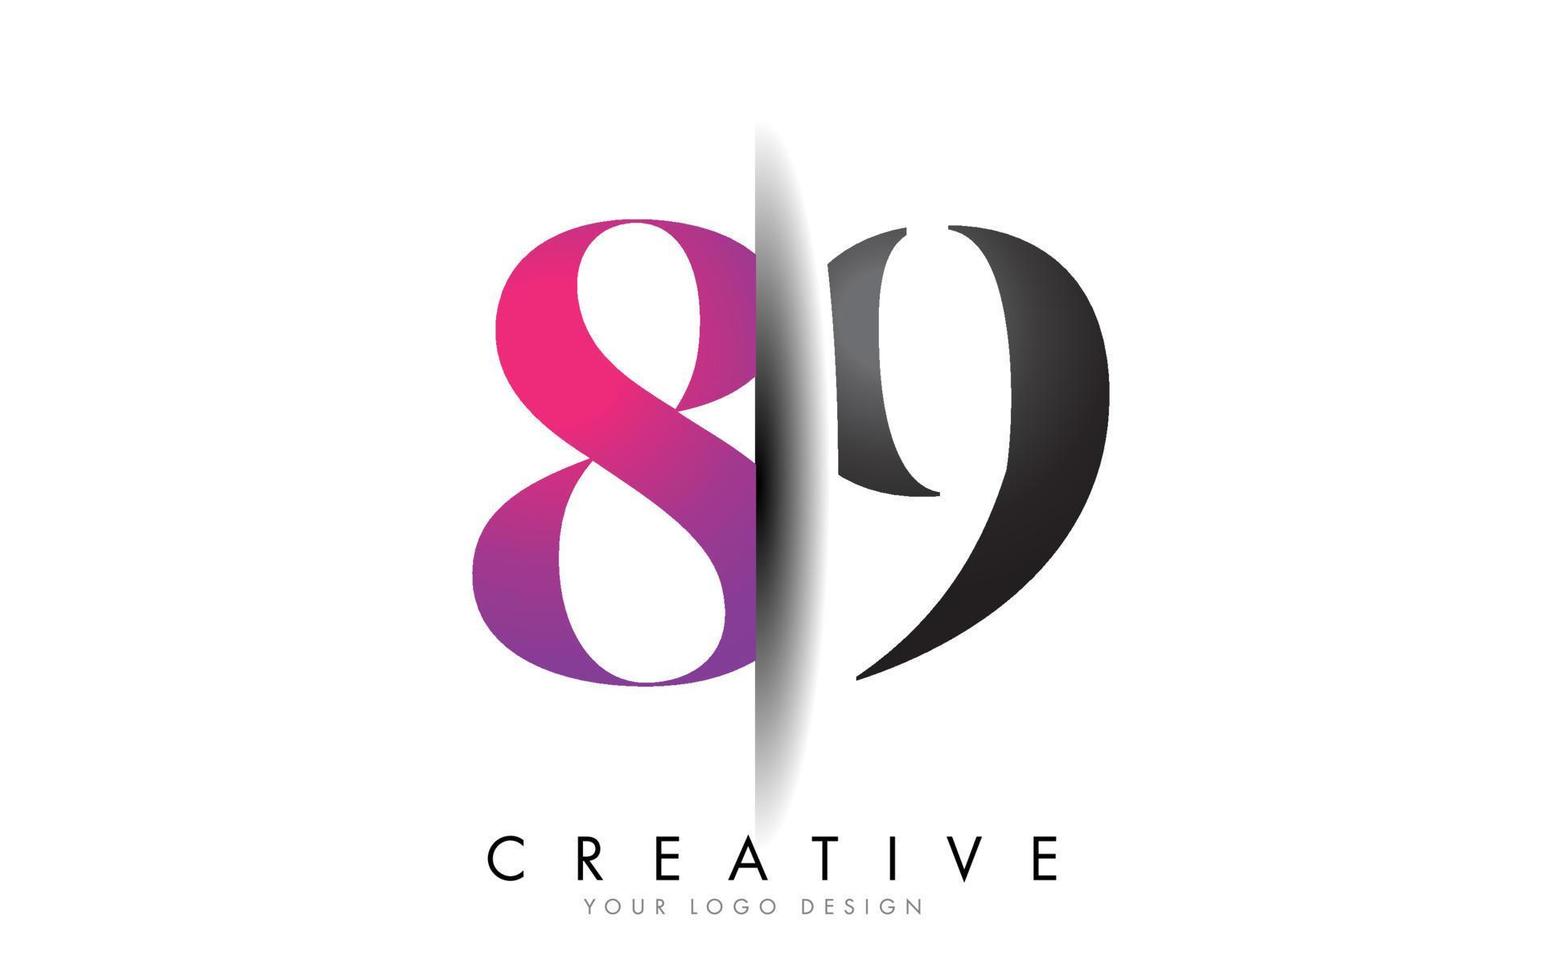 89 8 9 Grey and Pink Number Logo with Creative Shadow Cut Vector. vector